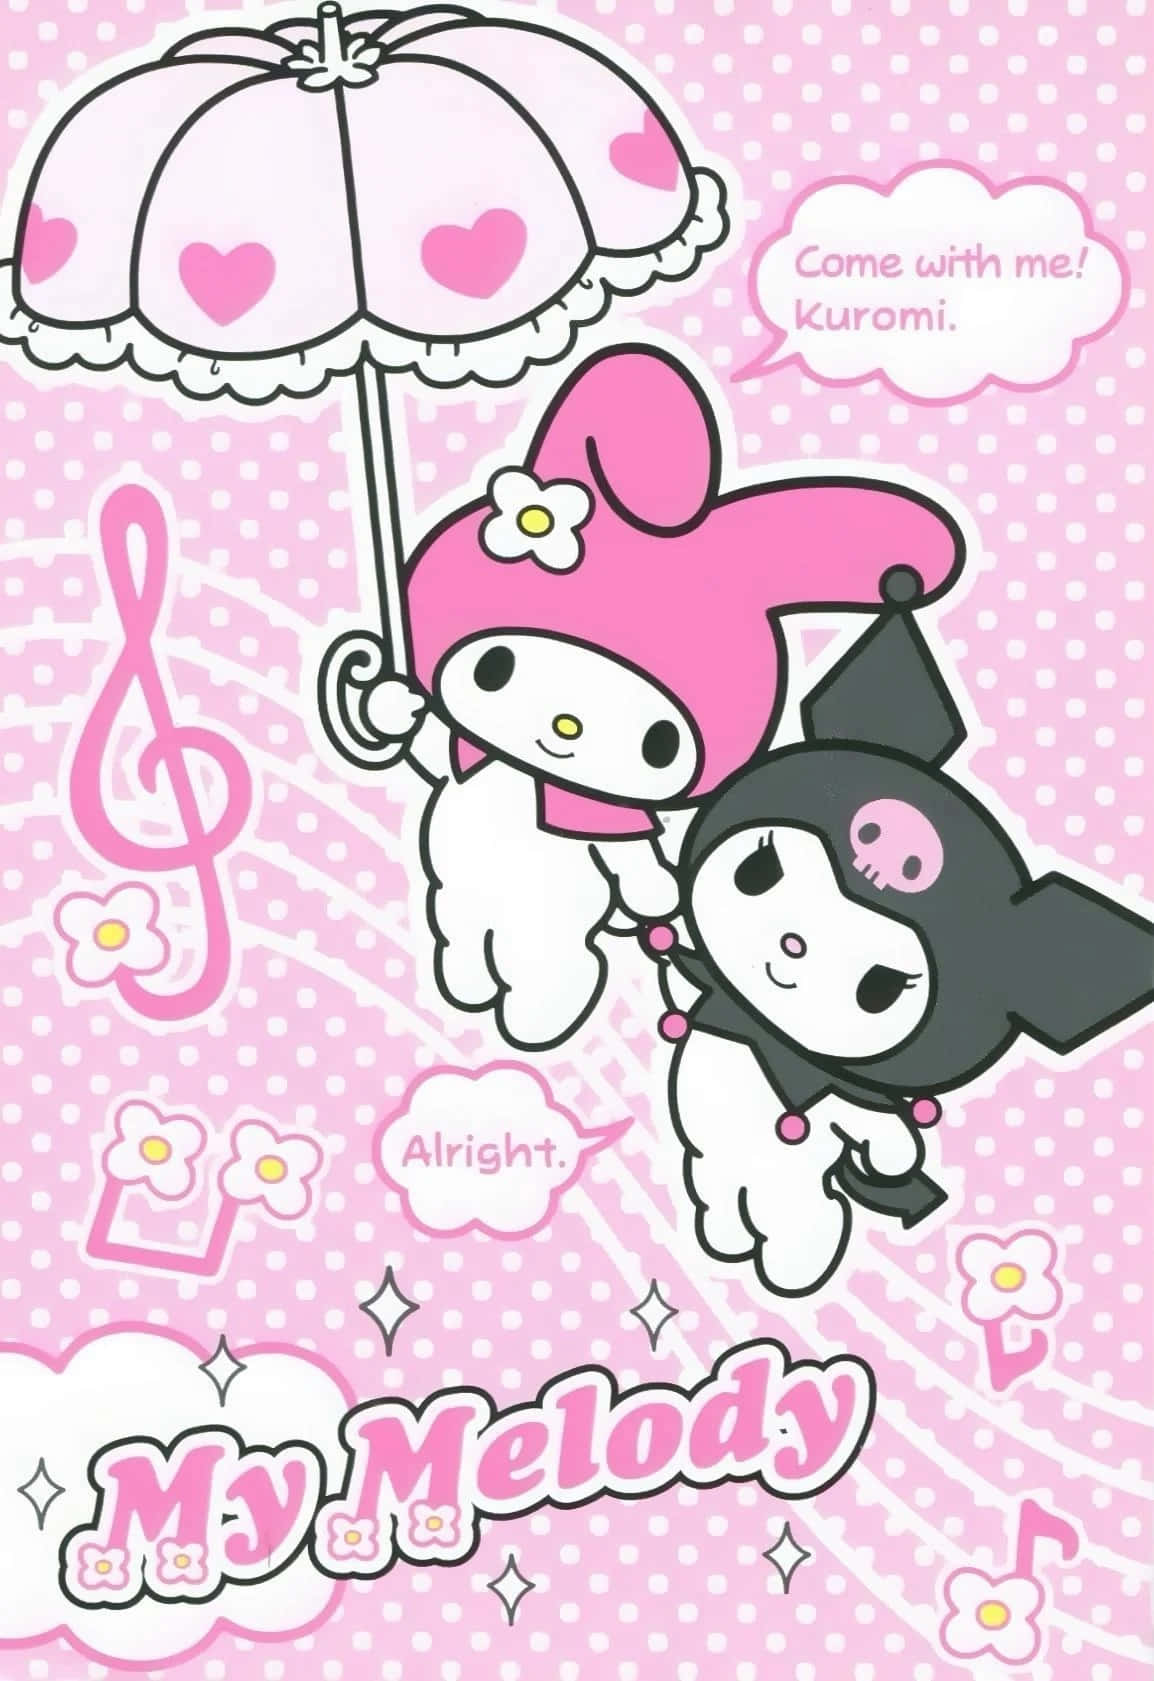 Kuromi and My Melody sharing a moment together Wallpaper